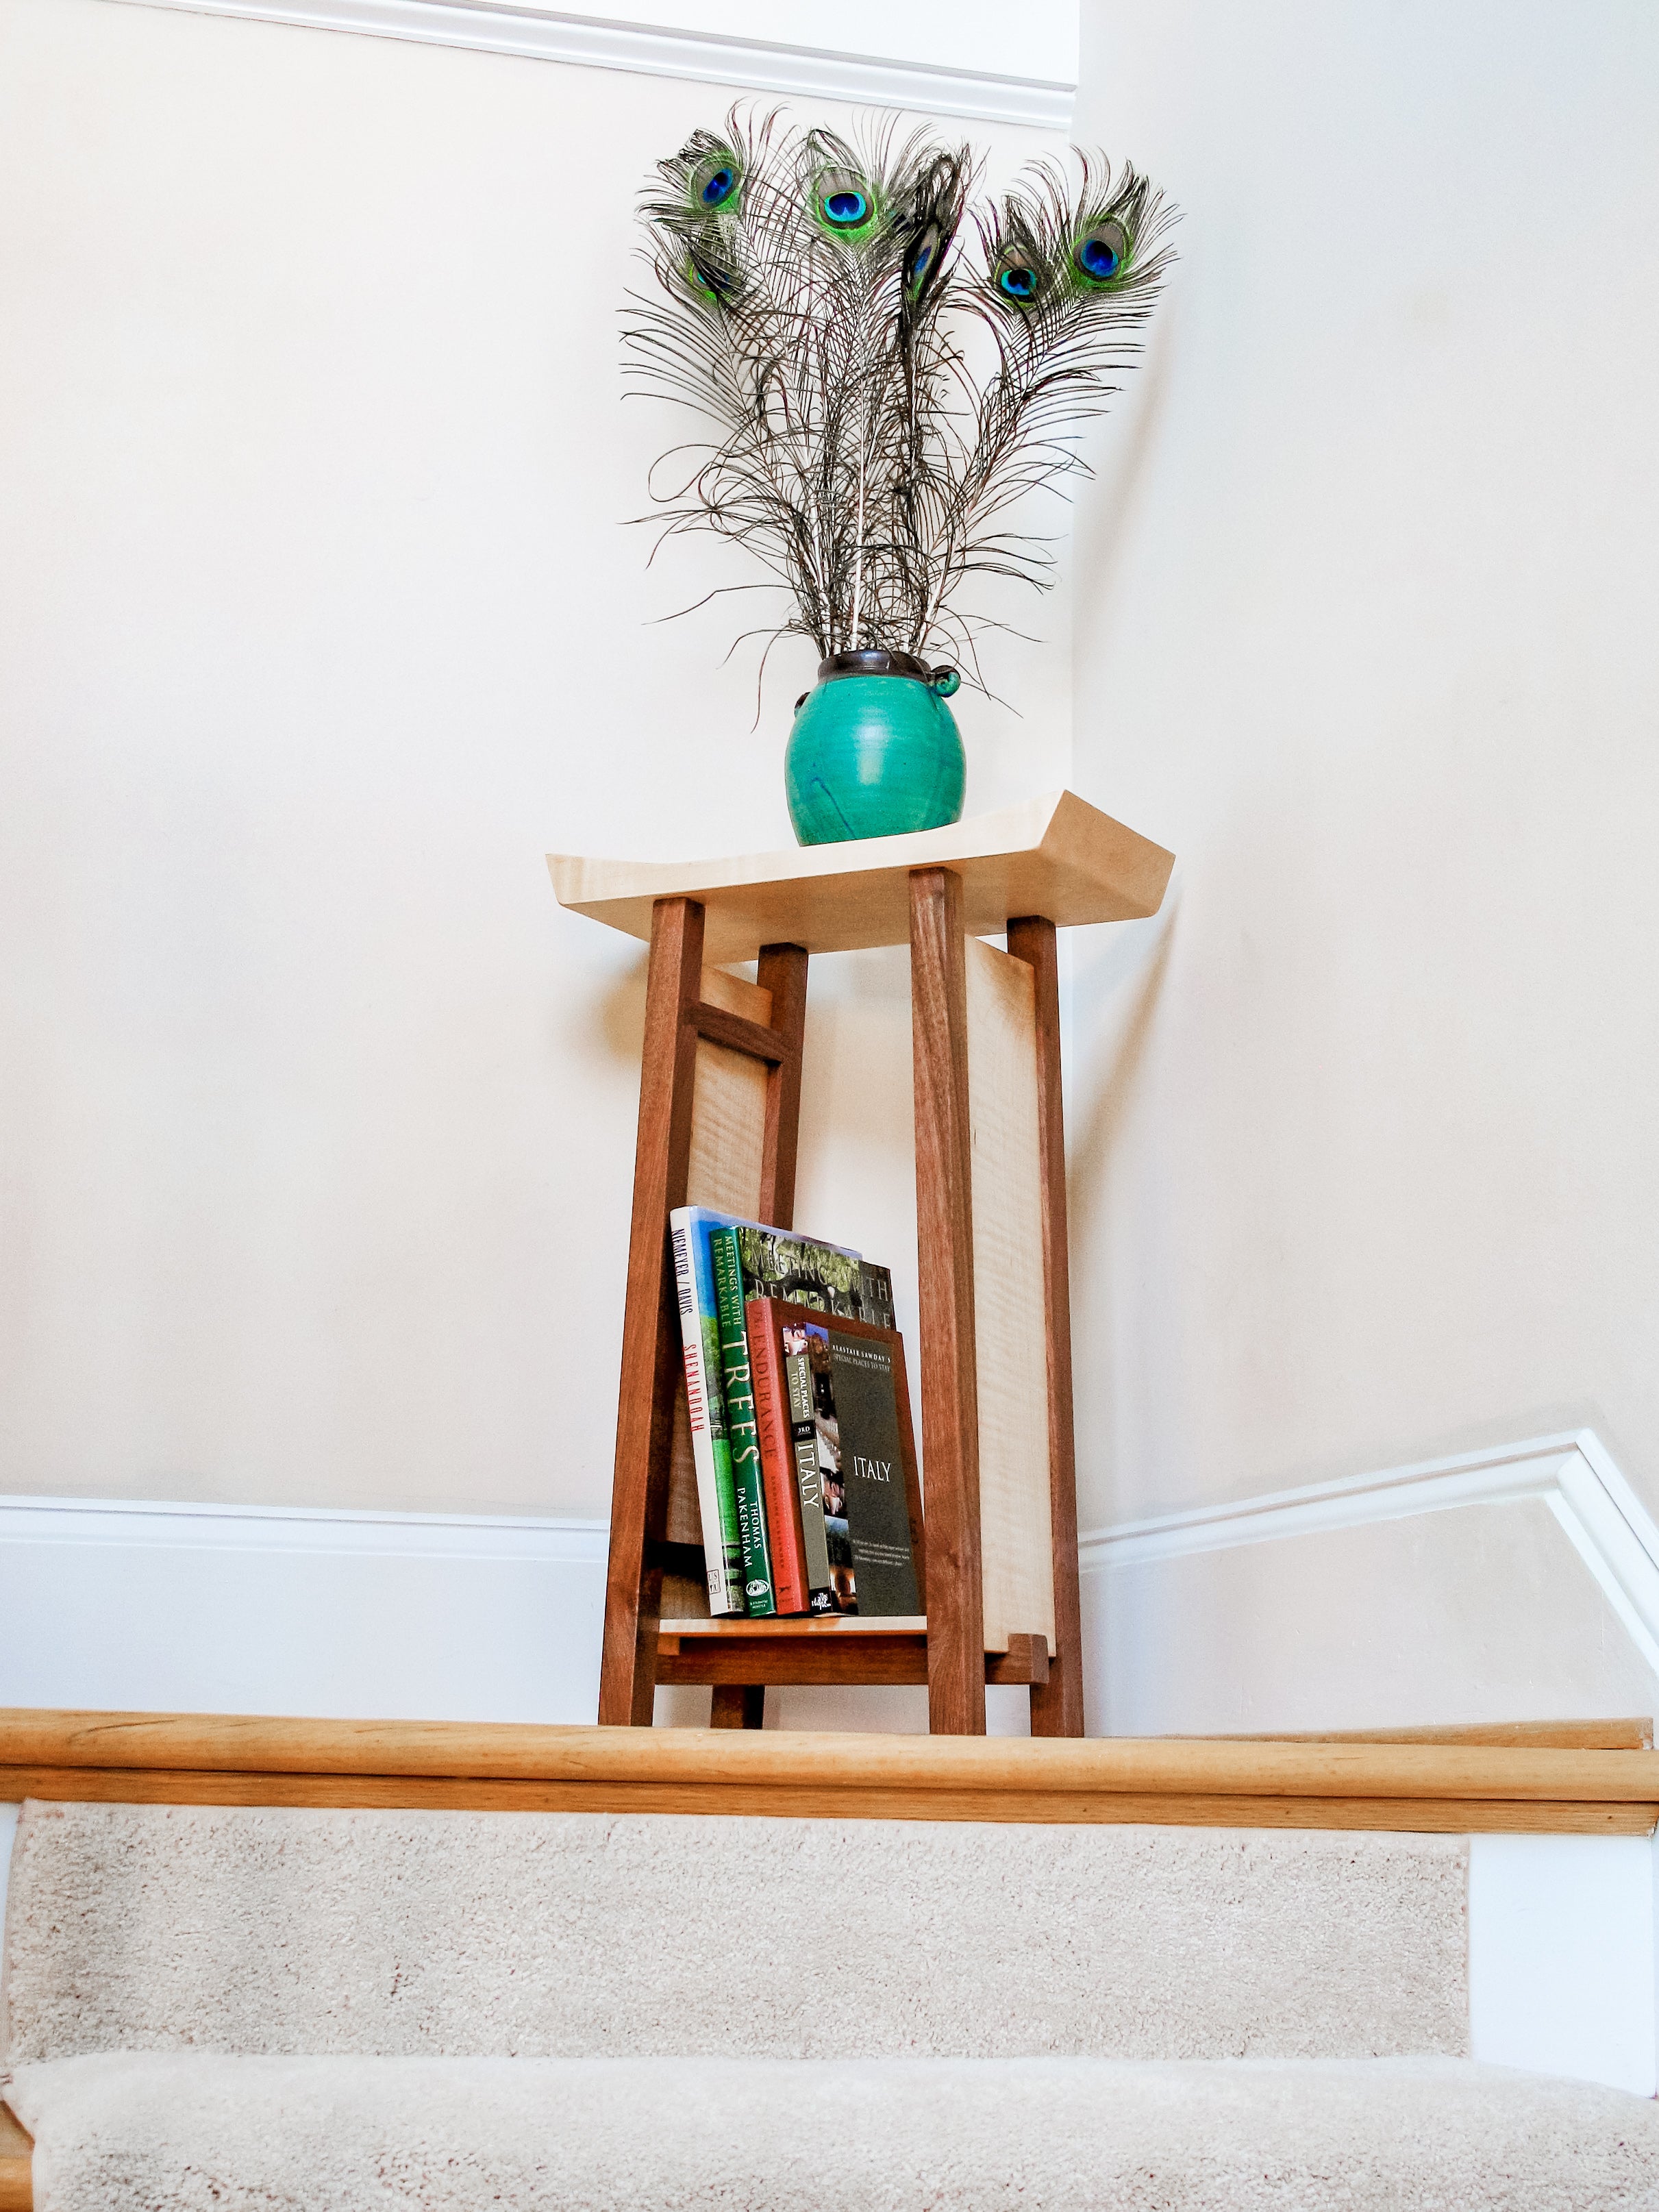 A unique side table for the stair landing with small bookshelf by Mokuzai Furniture